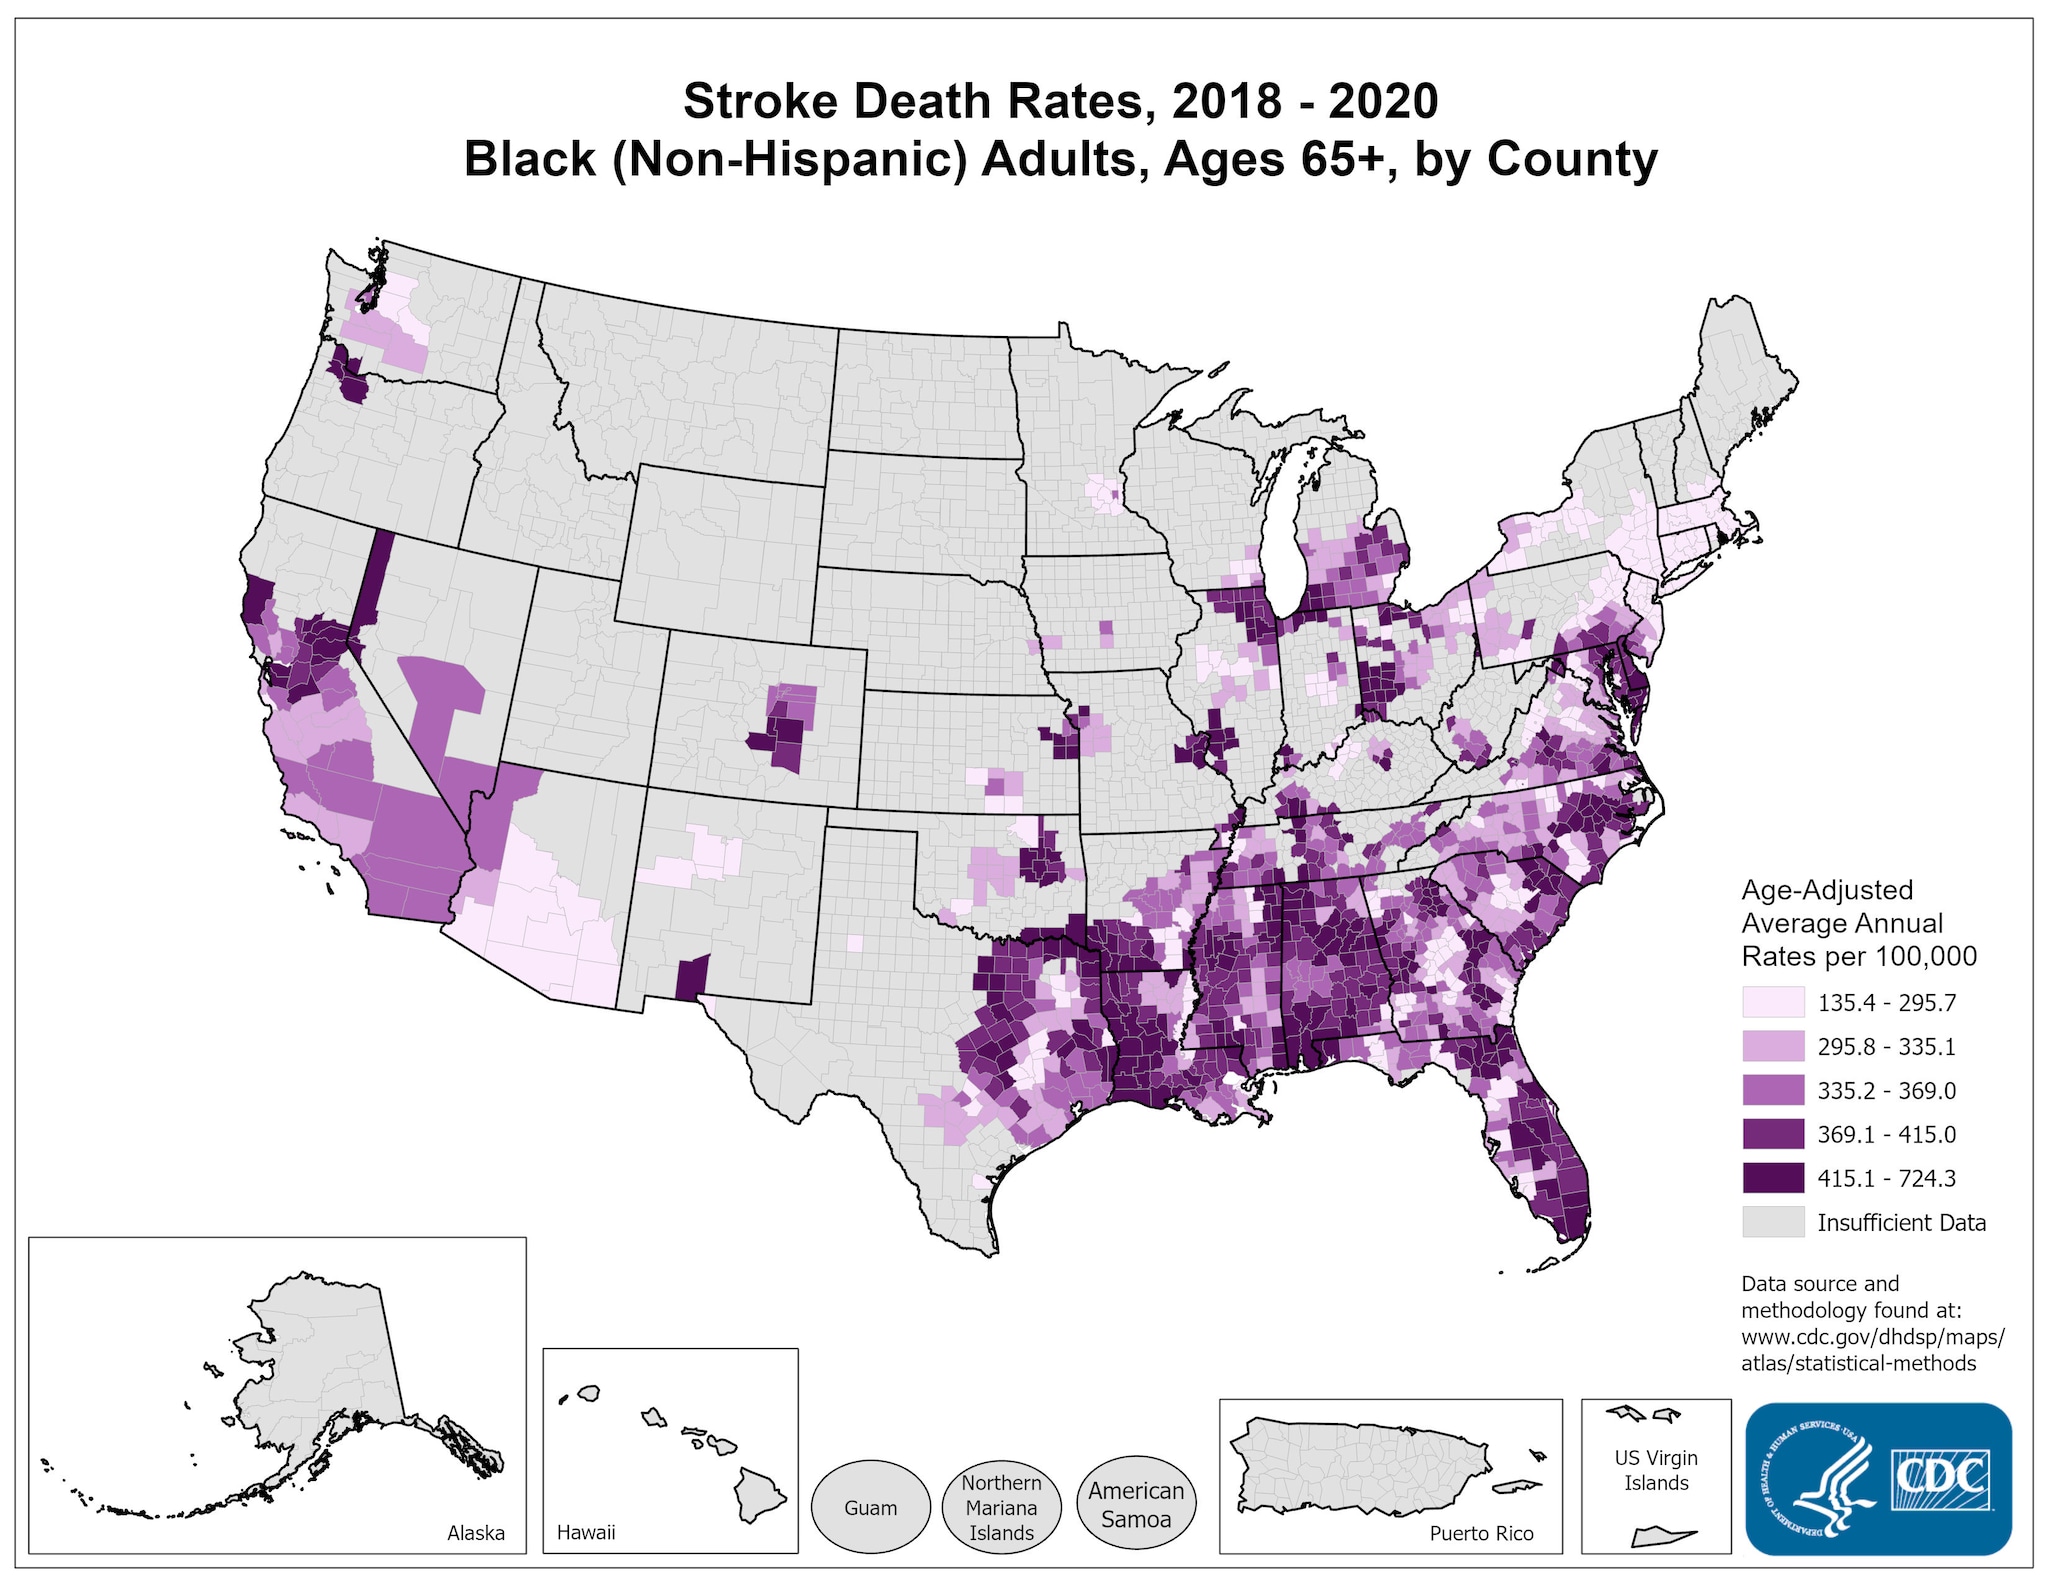 Stroke Death Rates for 2018 through 2020 for Blacks Aged 65 Years and Older by County